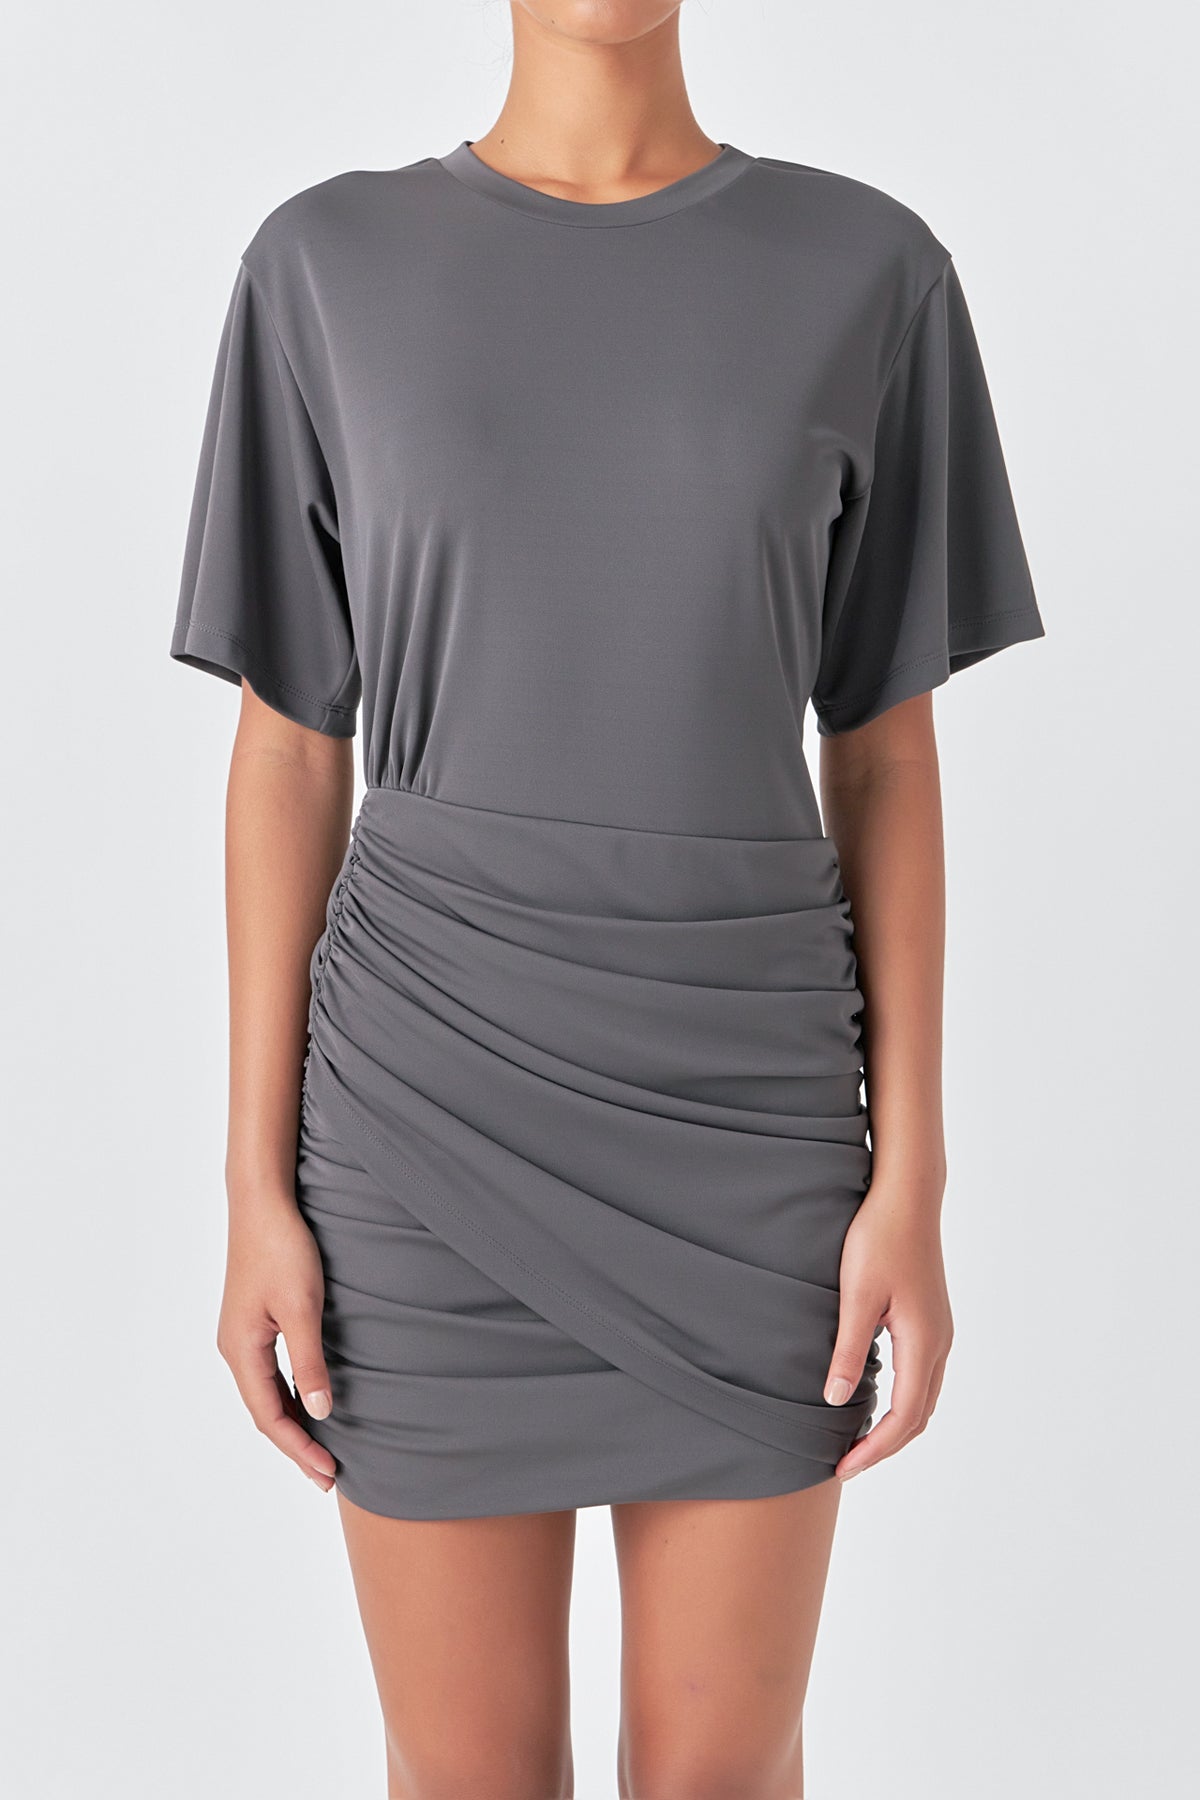 GREY LAB - Asymmetric Ruched Mini Dress - DRESSES available at Objectrare